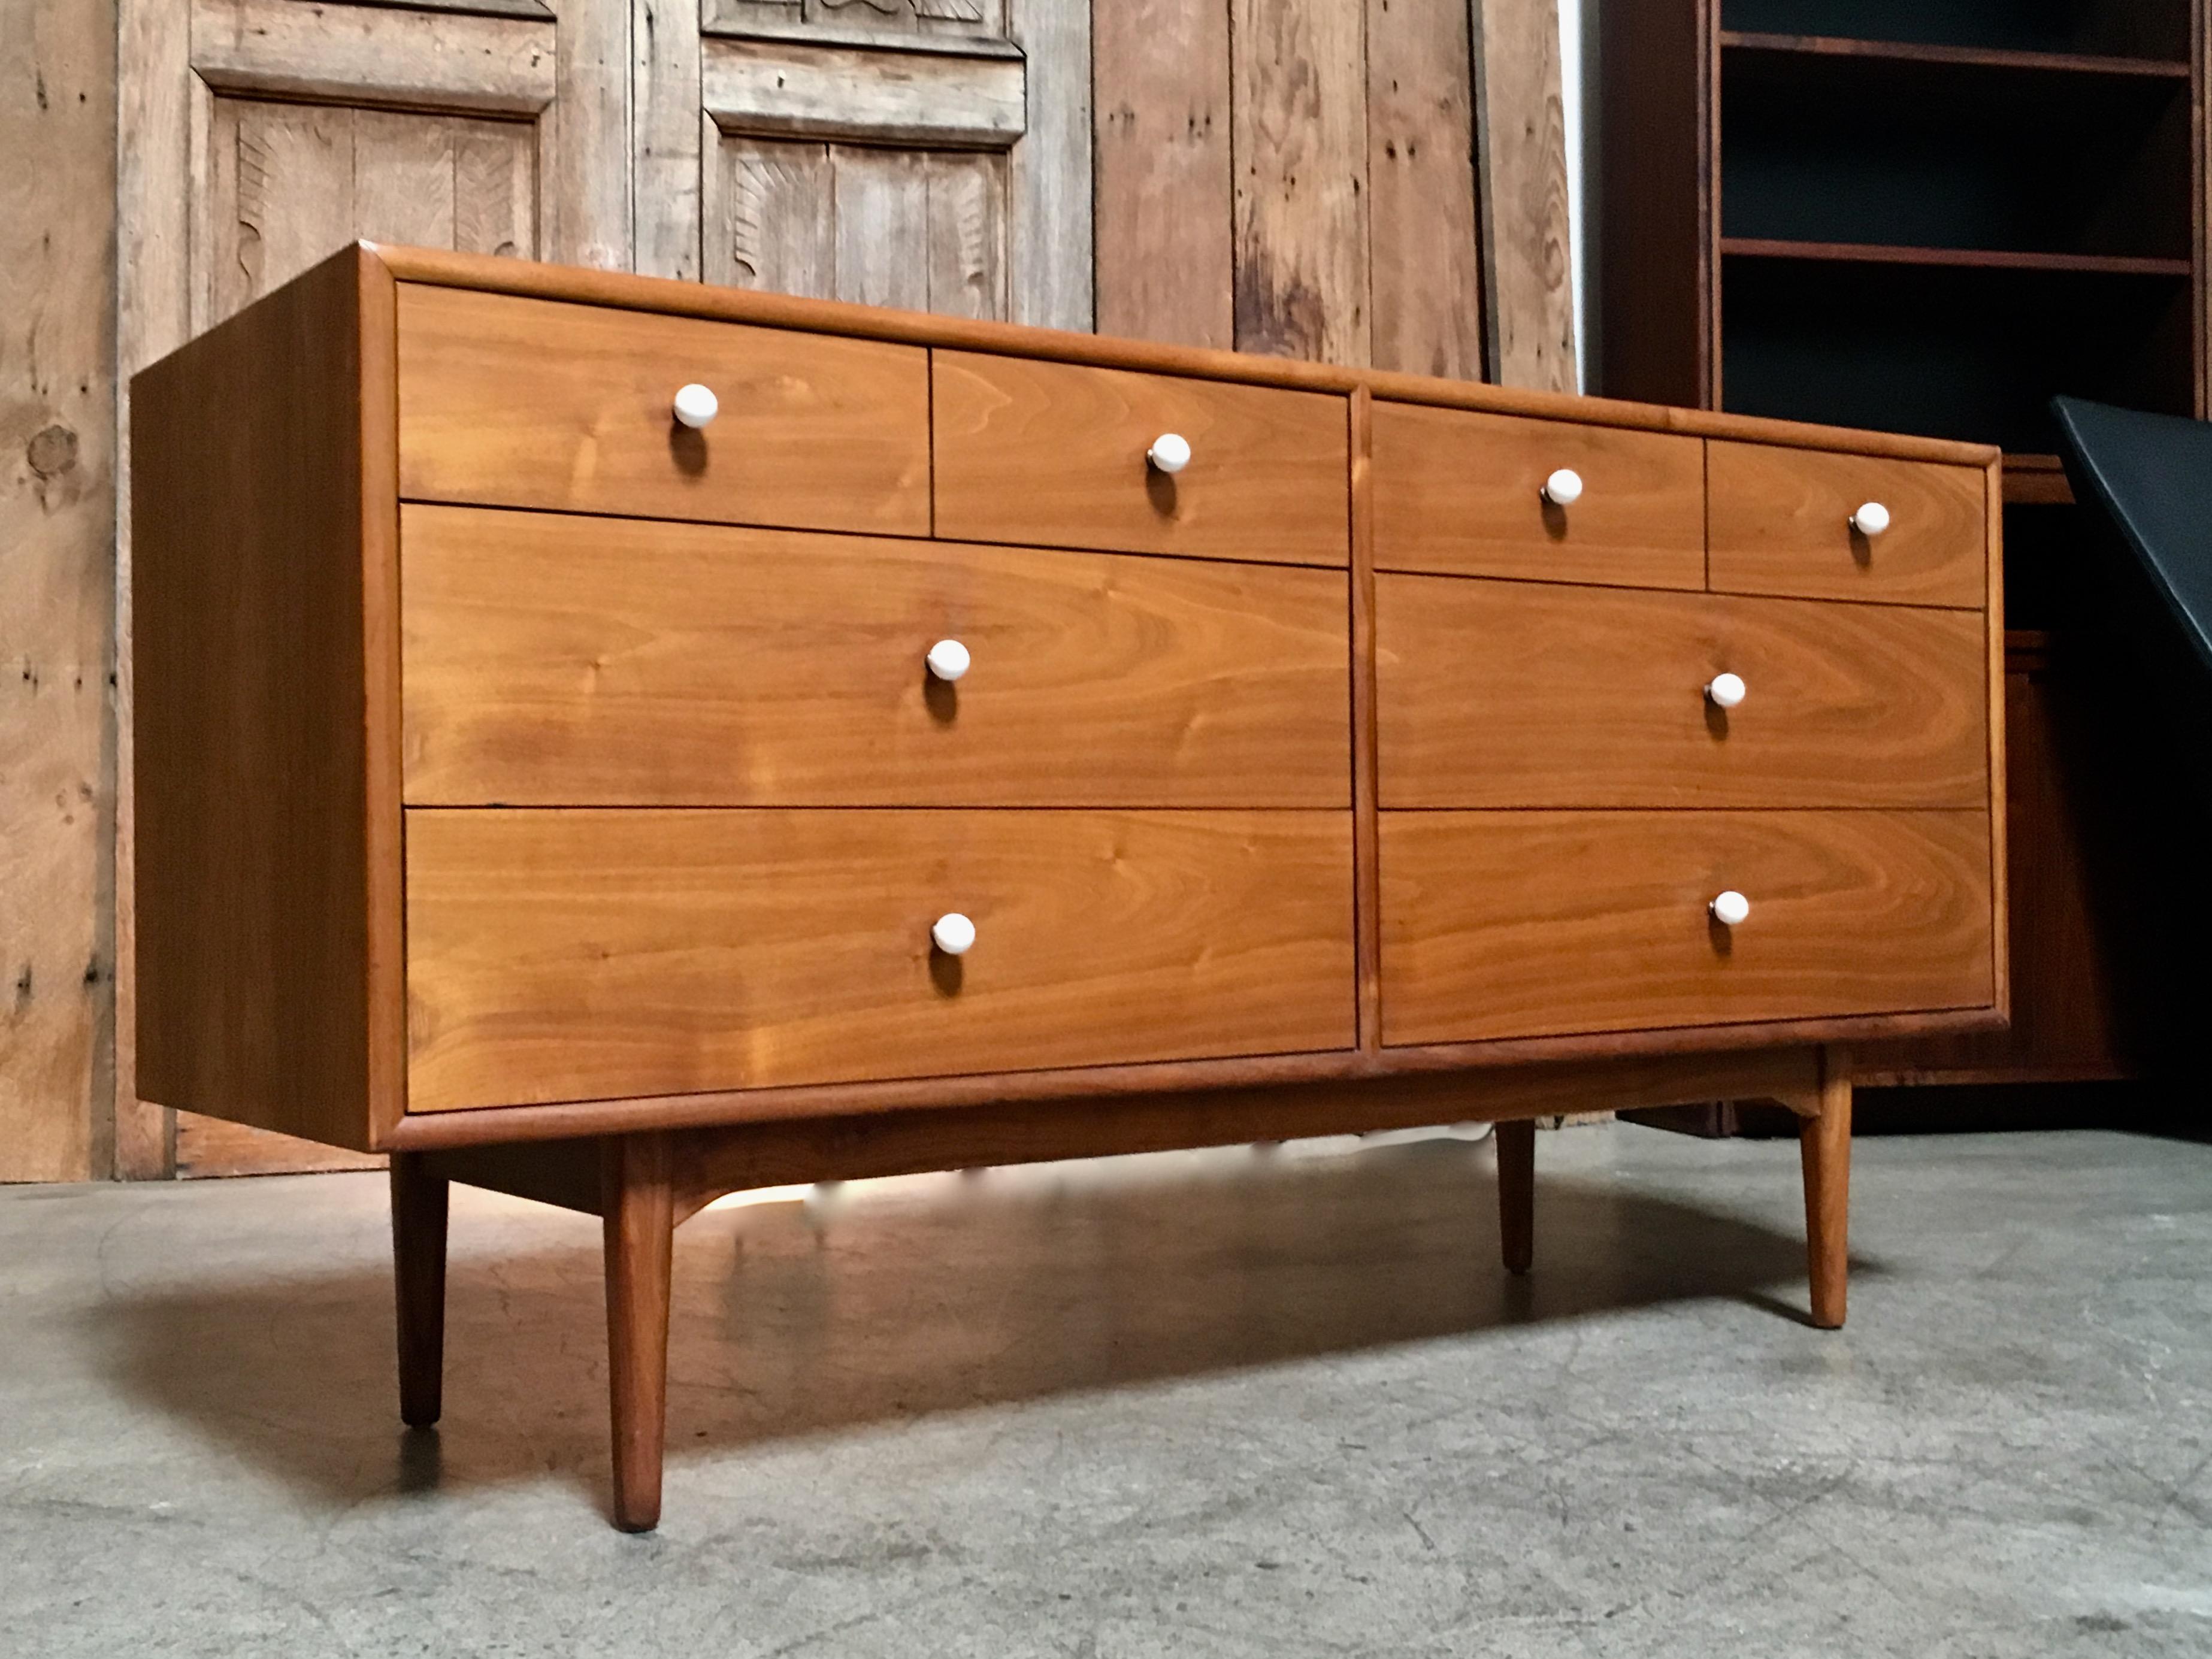 Walnut eight-drawer dresser with four on top over four larger drawers with white pulls
Designed by Kipp Stewart for Drexel.